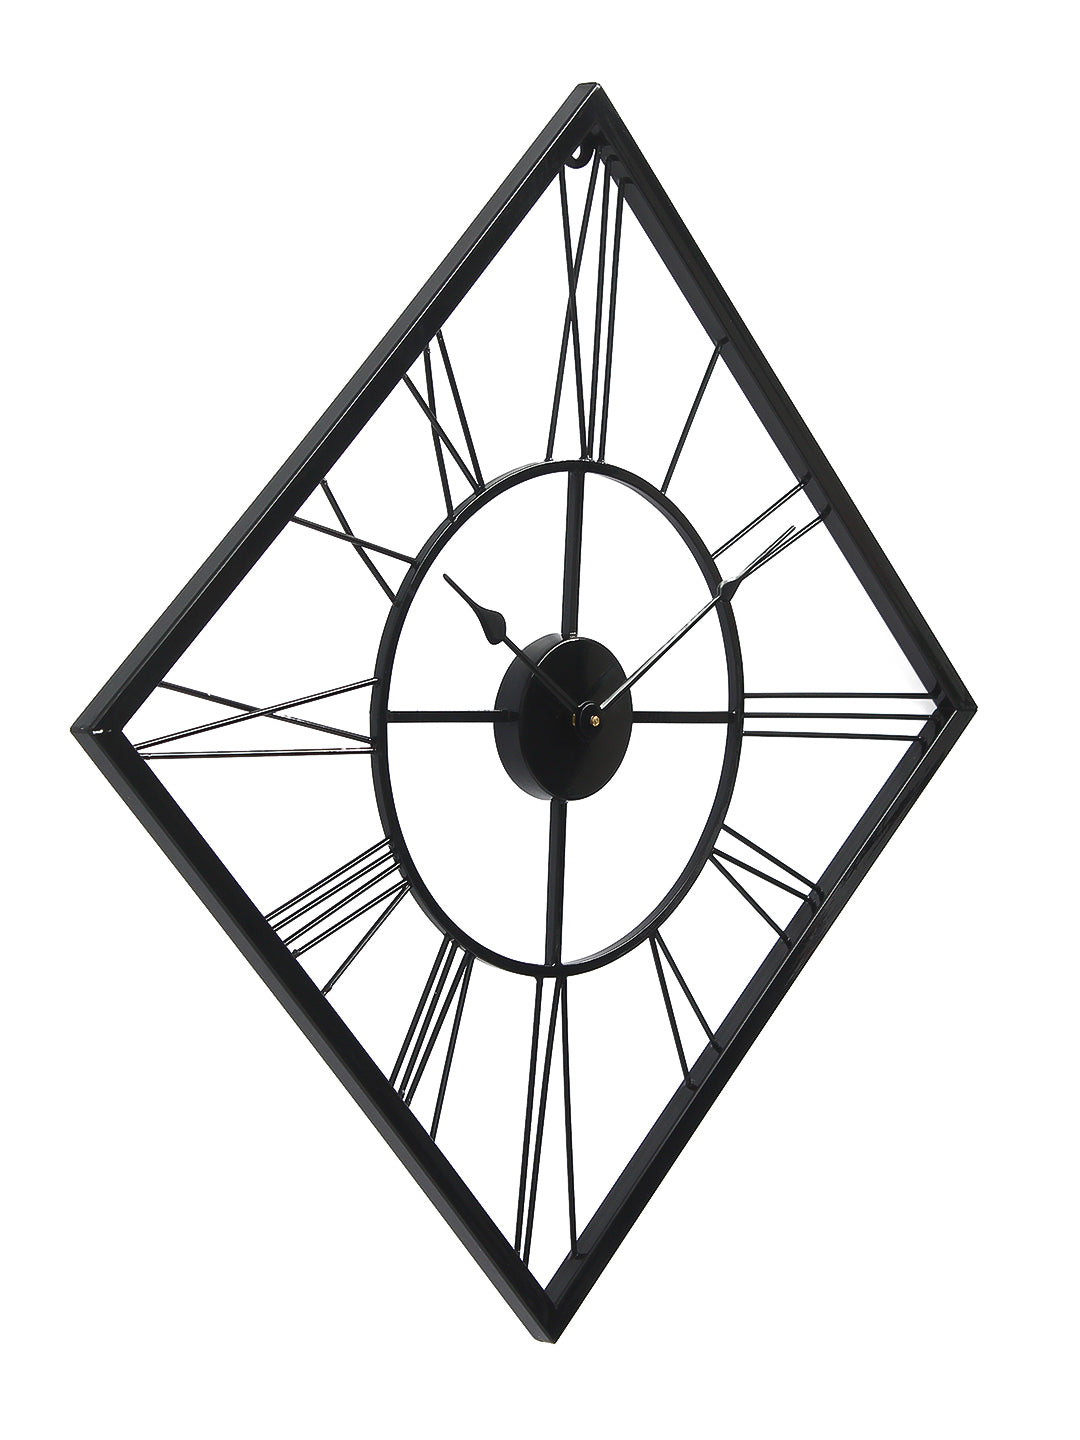 Black Iron Kite Shape Handcrafted Analog Roman Number Wall Clock Without Glass 5